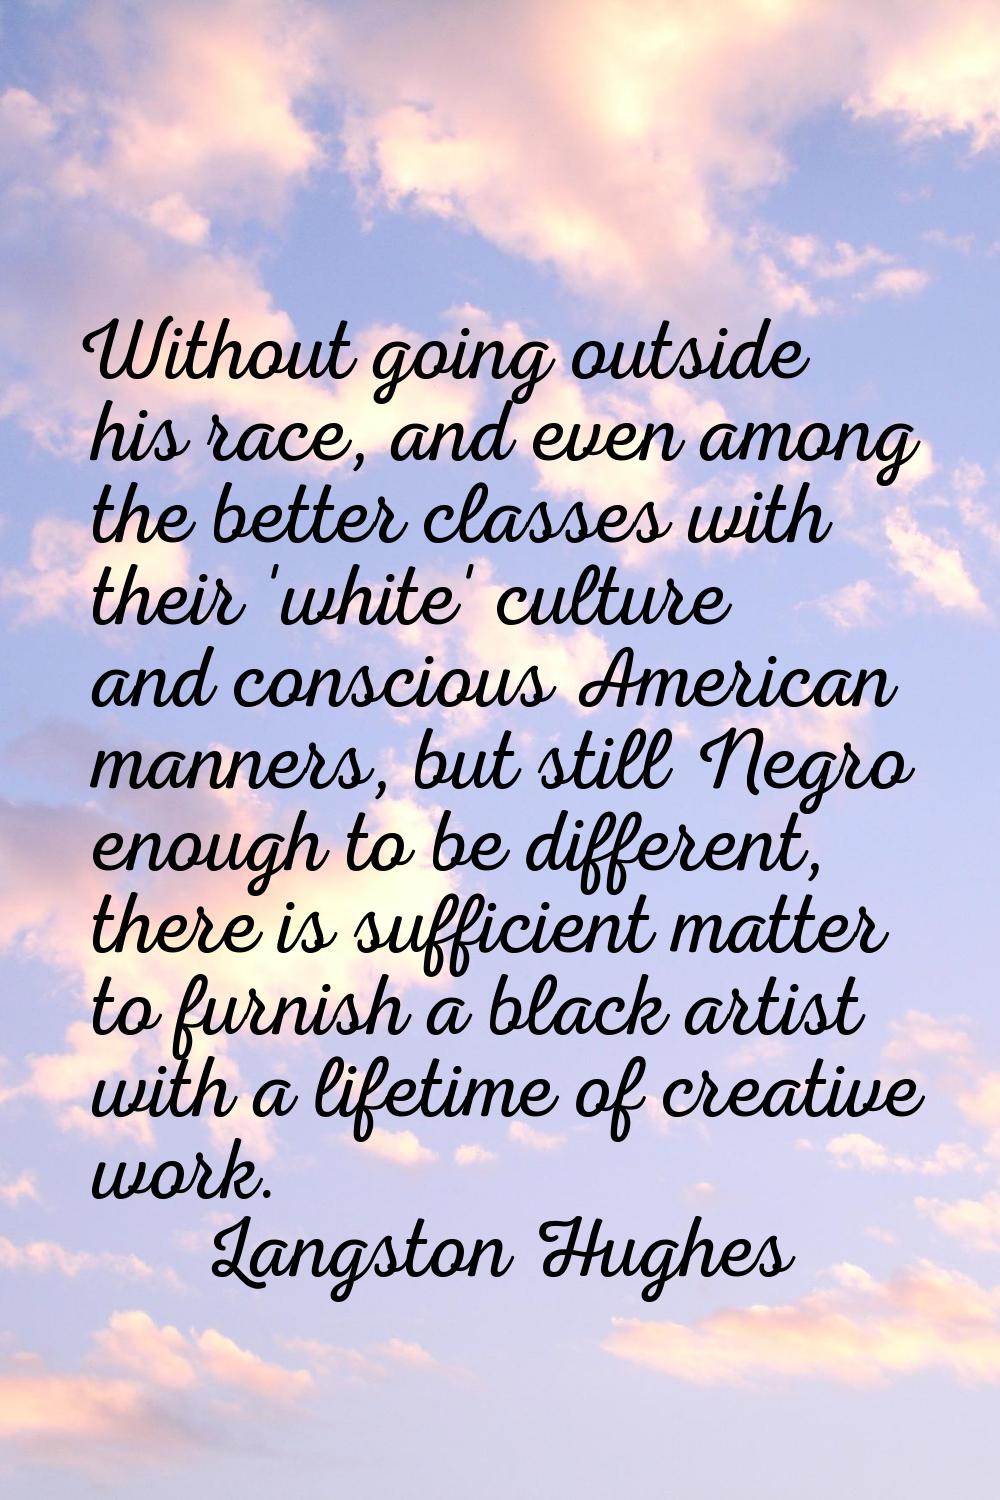 Without going outside his race, and even among the better classes with their 'white' culture and co